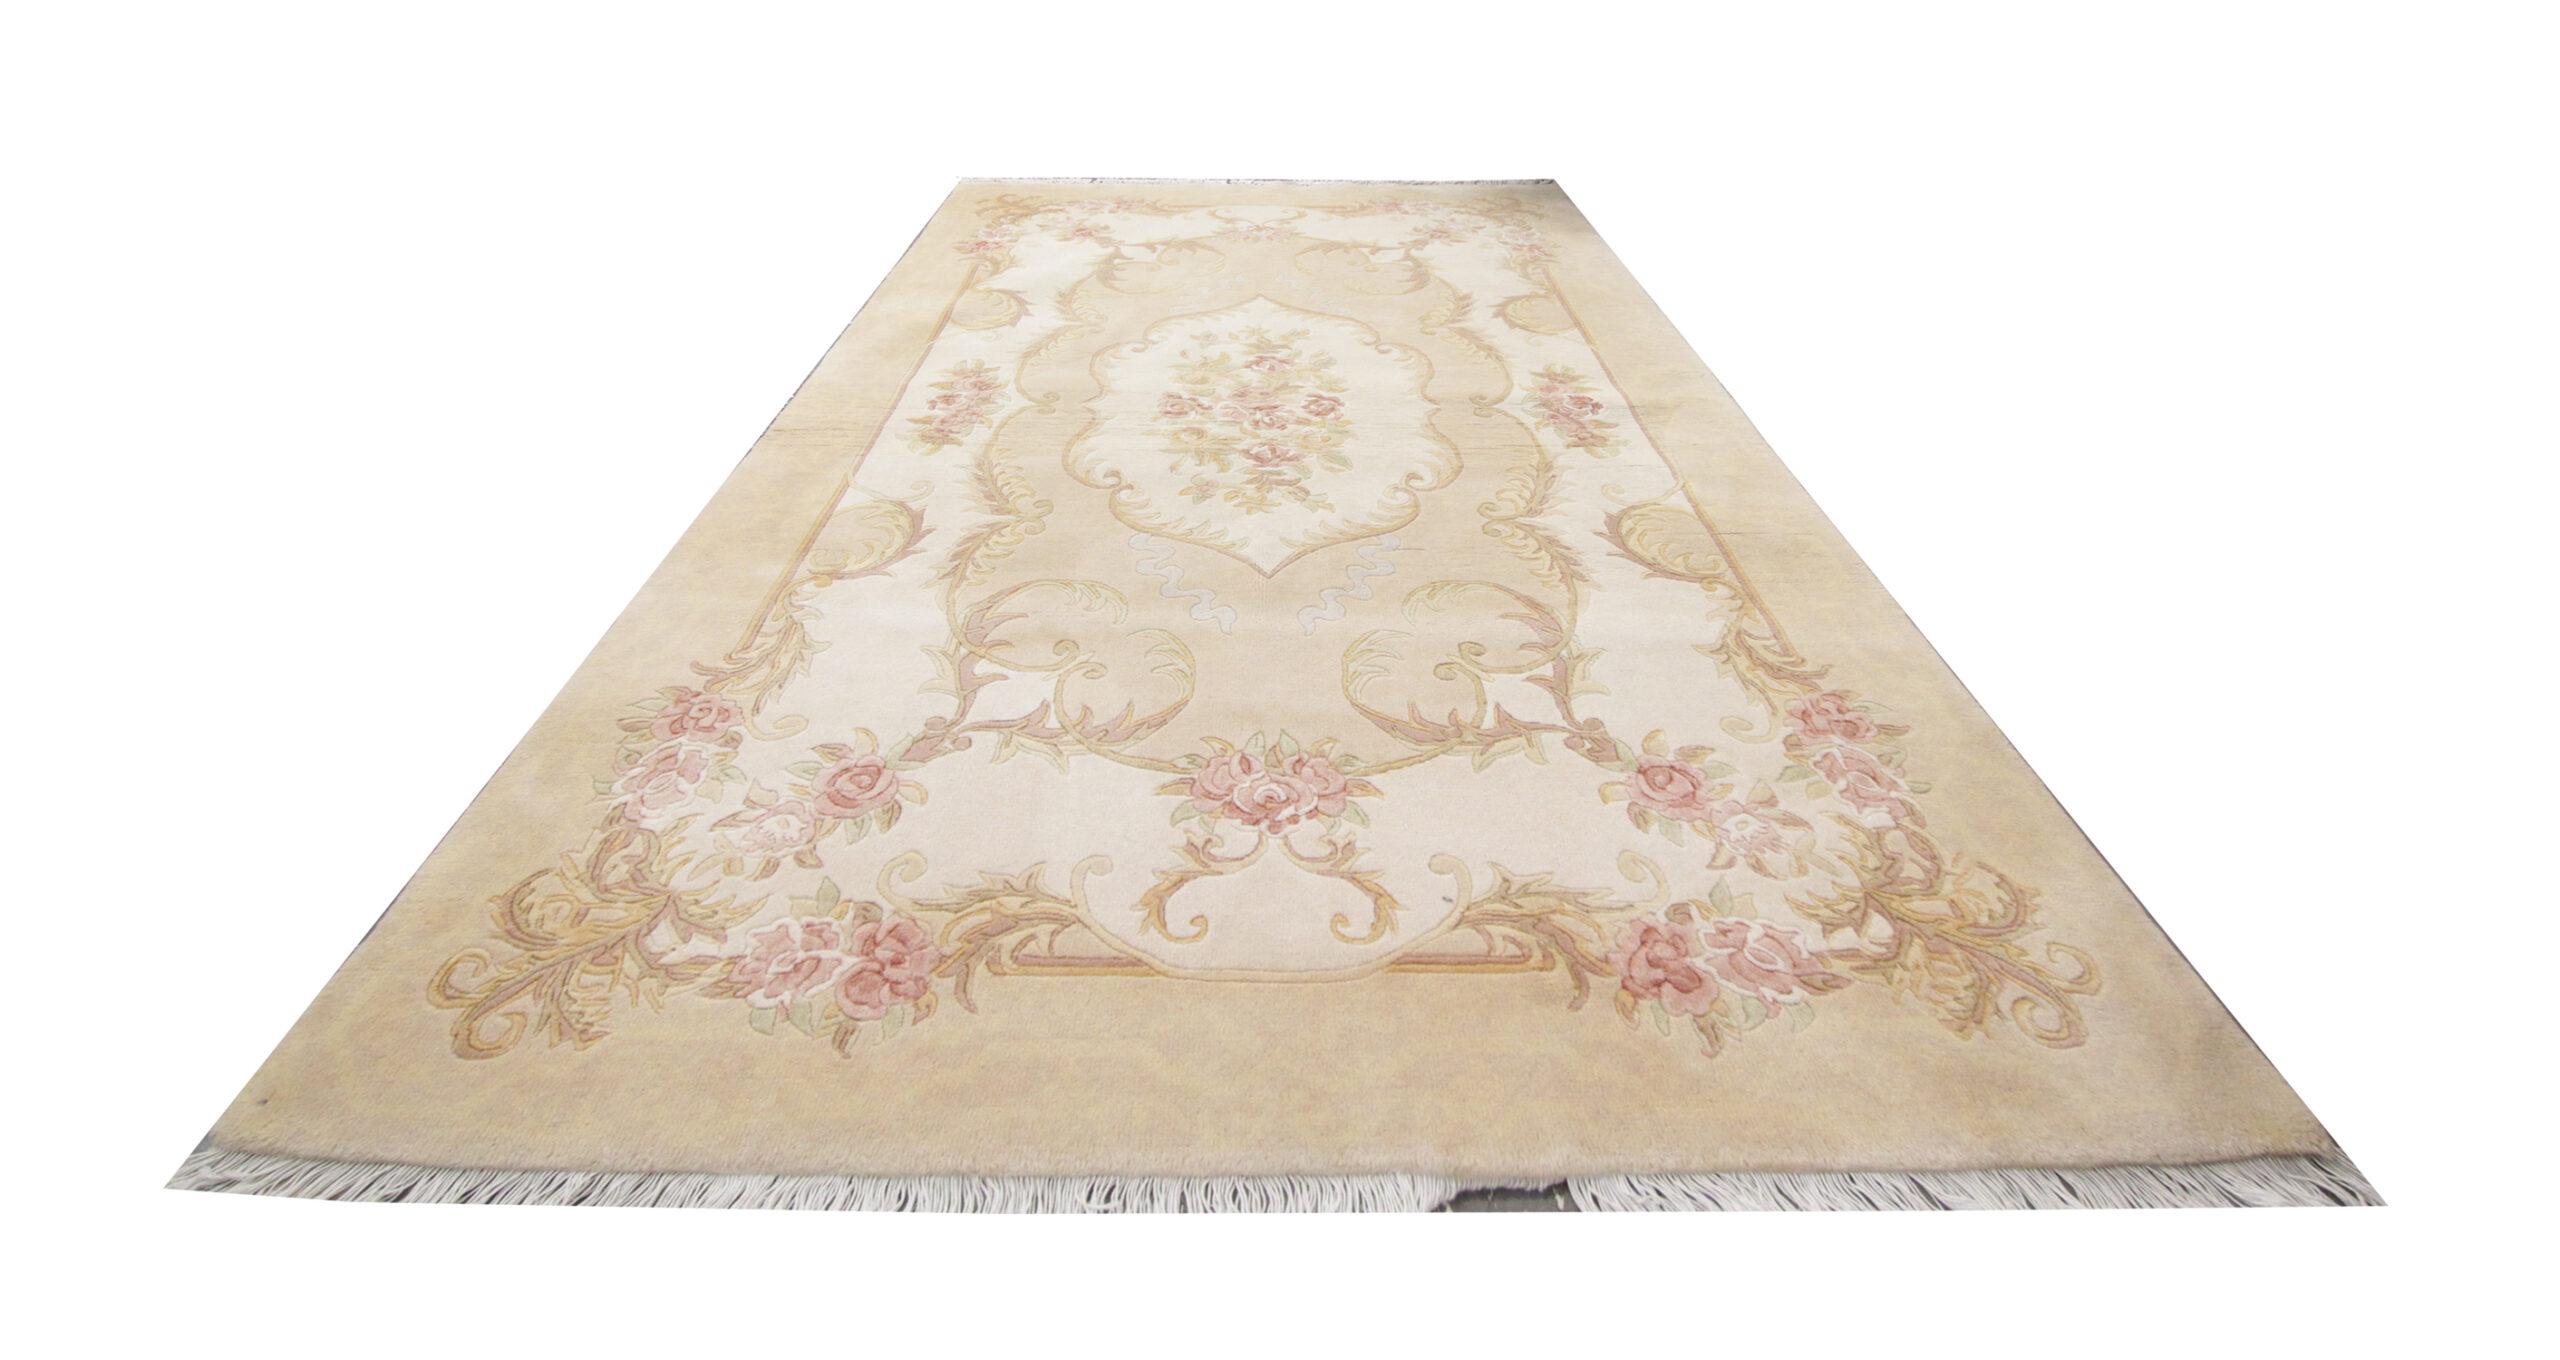 Luxurious yet simple, this Savonnerie-style area rug has been handwoven to perfection. Natural colours and tones flow beautifully to create this symmetrical rug. Suitable for any country house or modern home, the ornate design is based on the